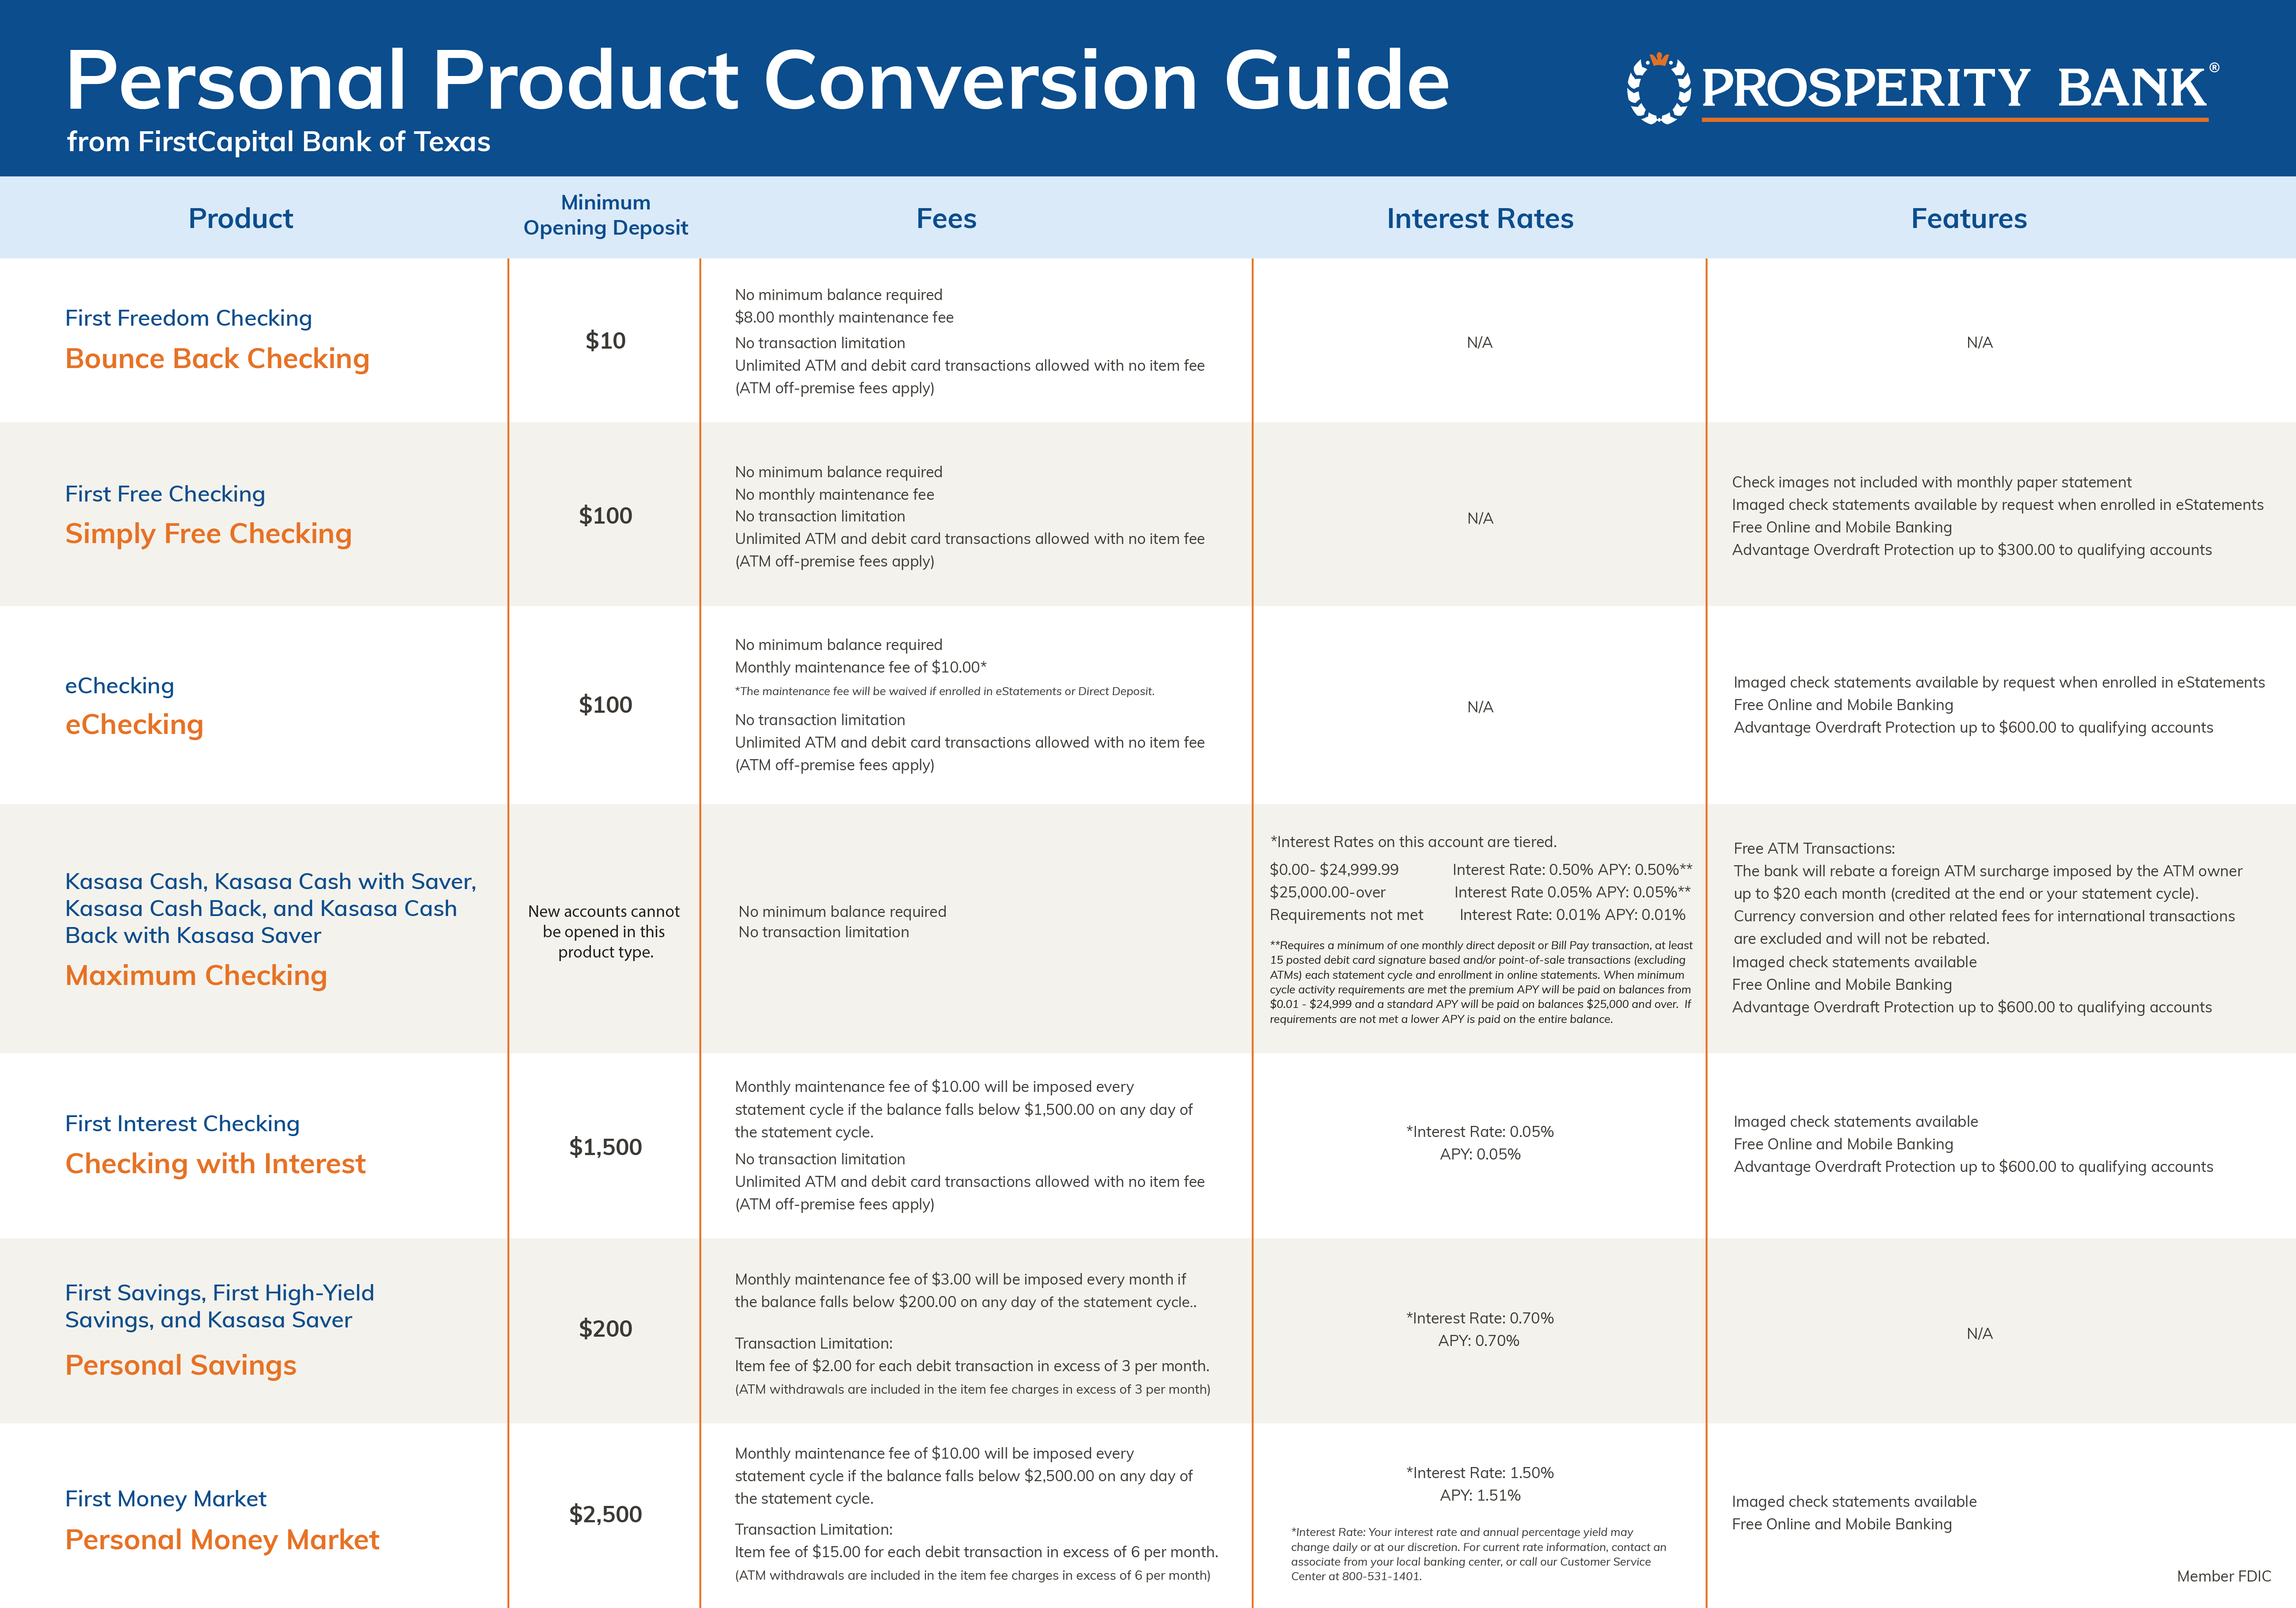 FirstCapital - Personal Product Conversion Guide-2